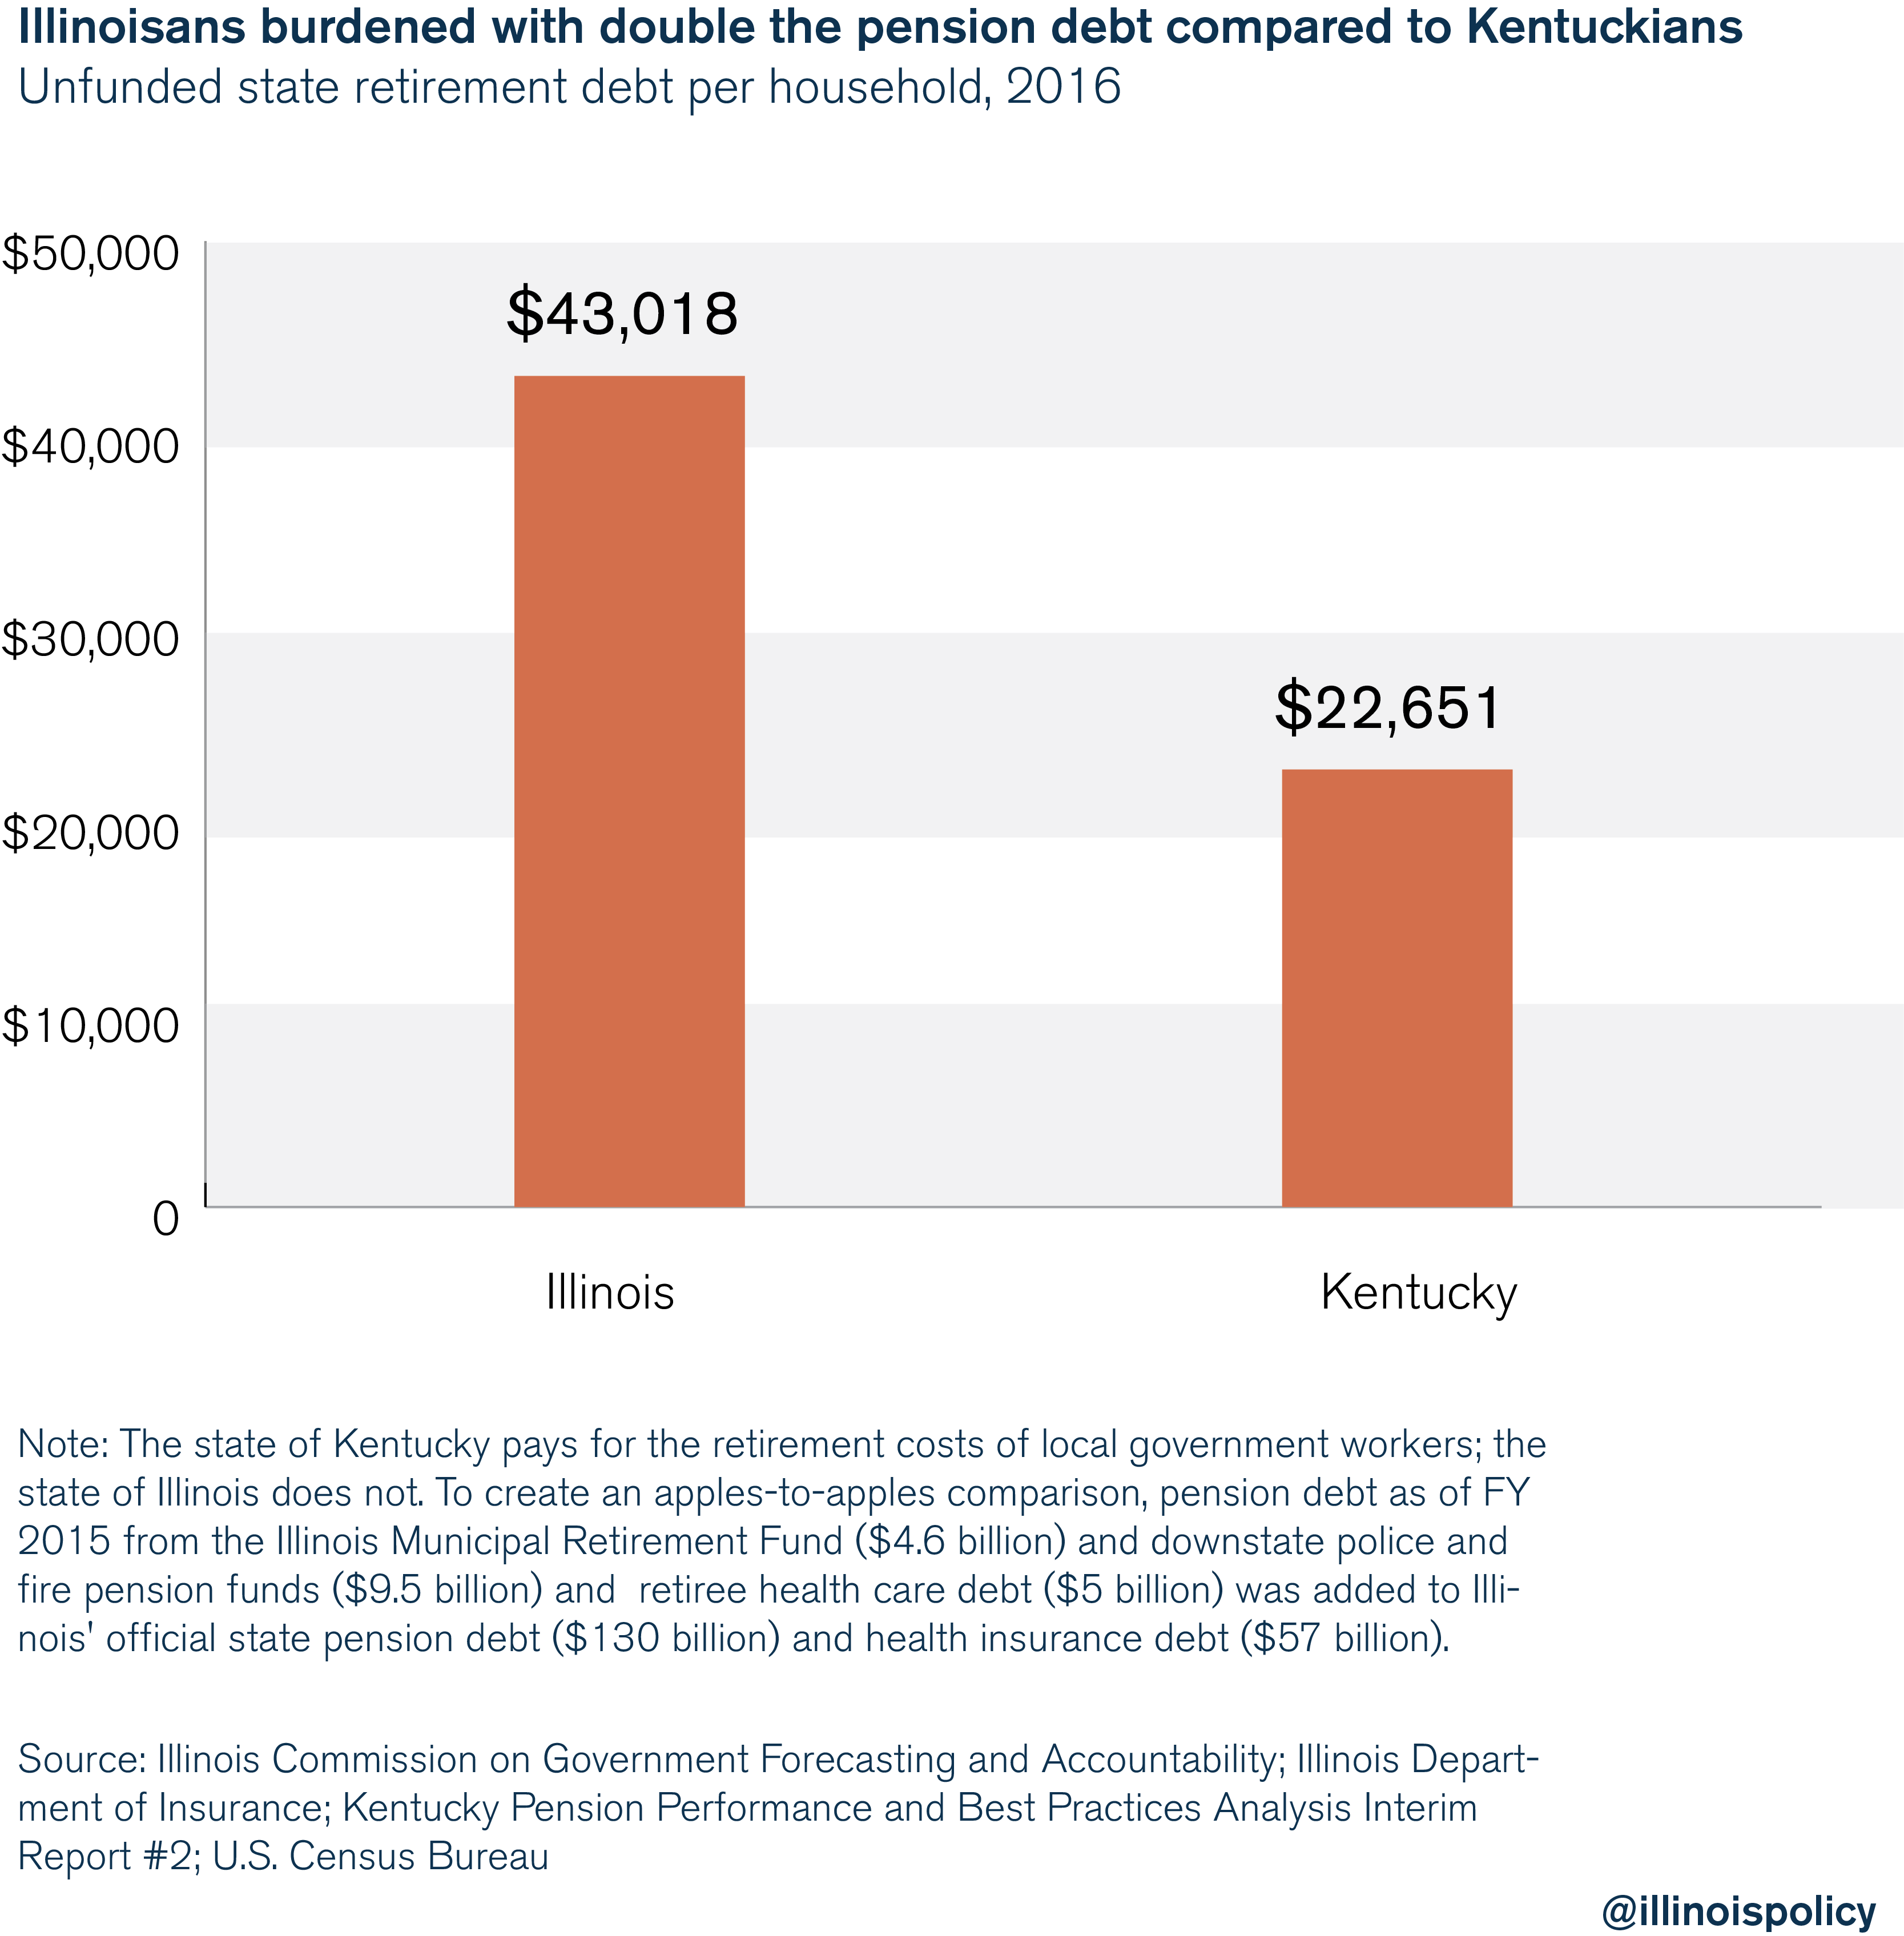 Illinoisans burdened with double the pension debt burden compared to Kentuckians